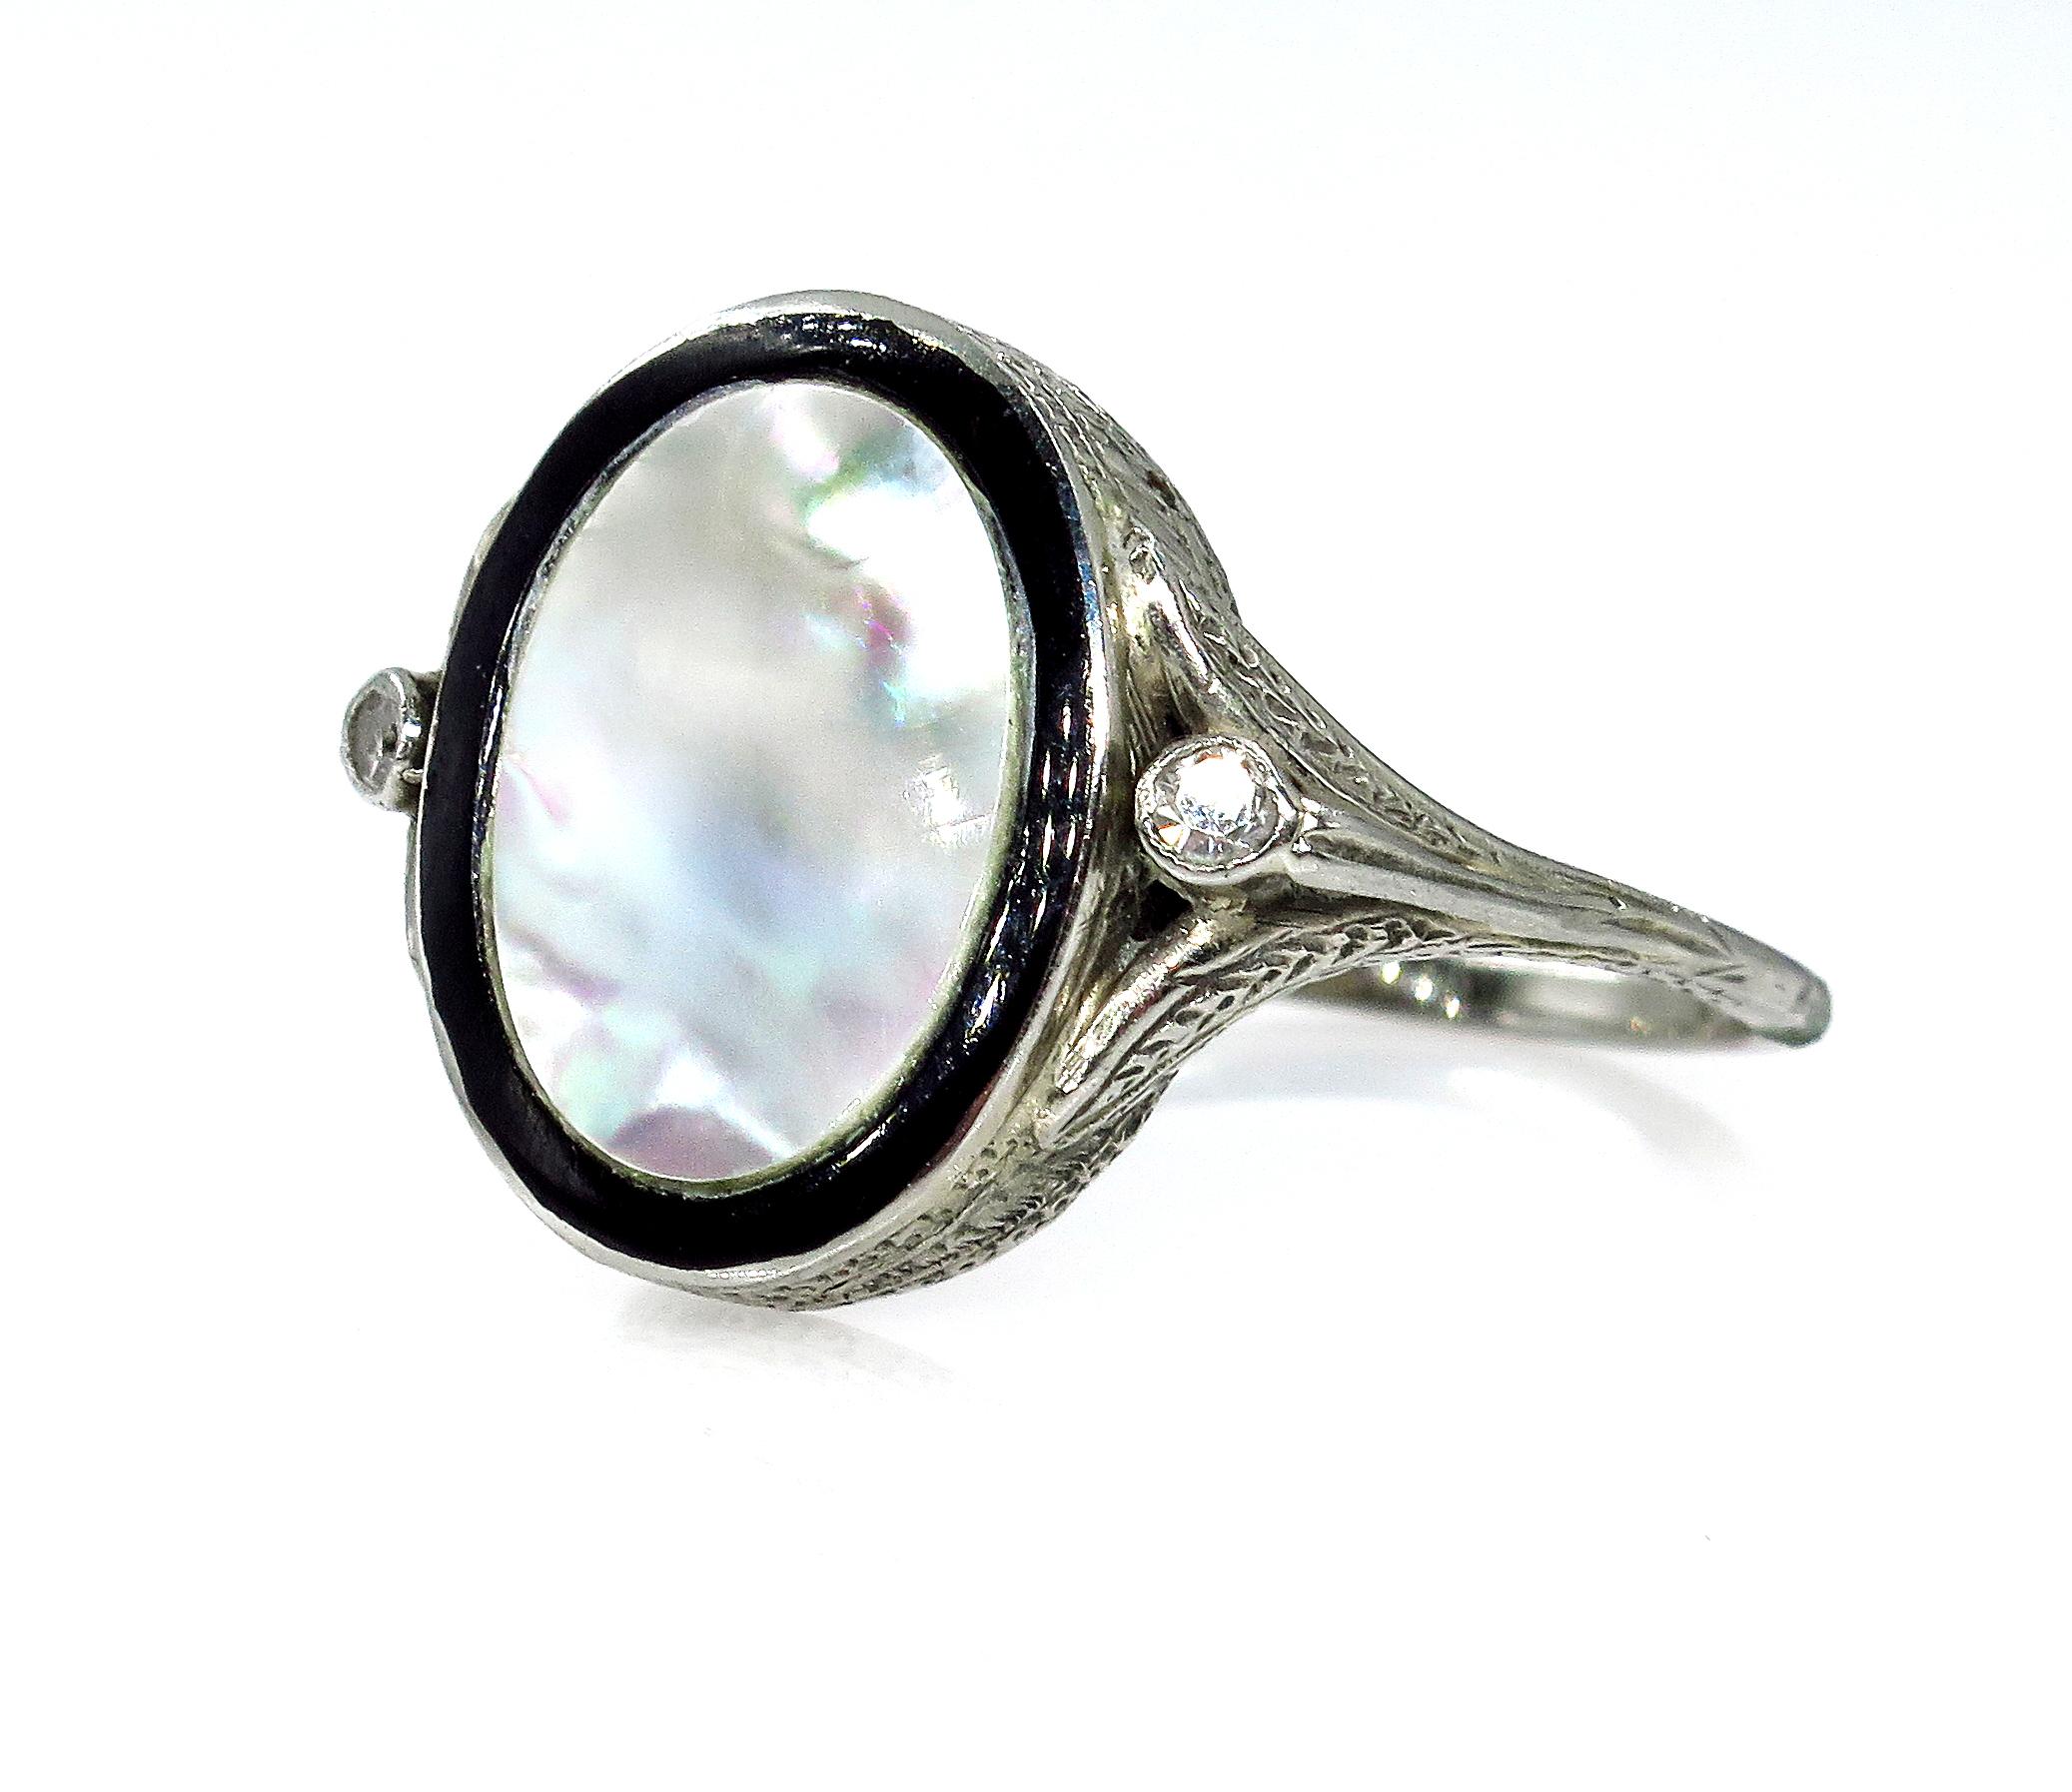 A truly spectacular and Fun Jazz Age jewel that will take you from Day to Night. From the Roaring '20s comes this striking Black & White Mother -of-Pearl Ring. Elegantly hand-fabricated in platinum, hand-engraved designs surround the loveliest